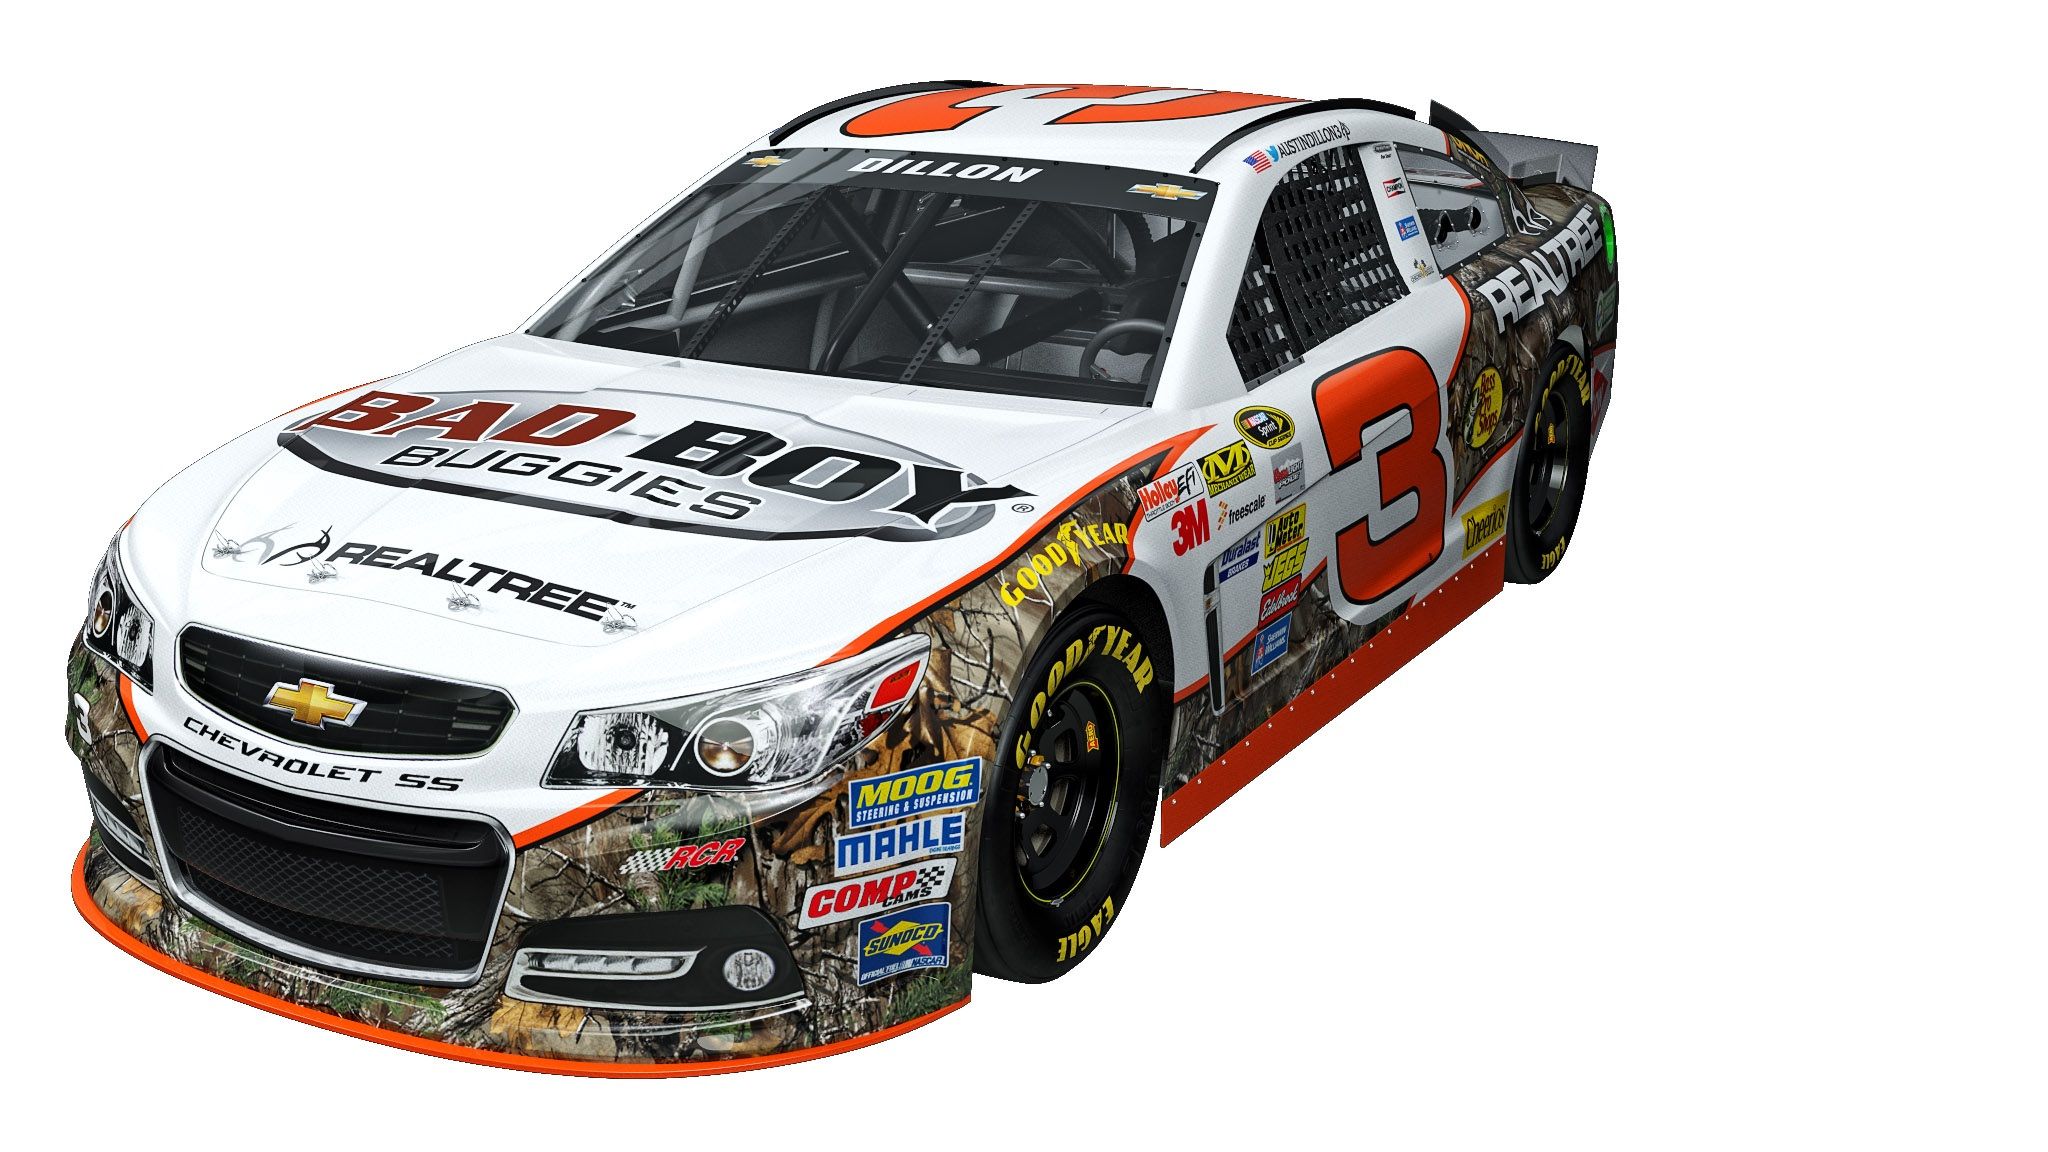 Realtree and Bad Boy Buggies to Partner with Austin Dillon and Richard Childress Racing's No. 3 NASCAR Sprint Cup Series Program at Bristol Motor Speedway